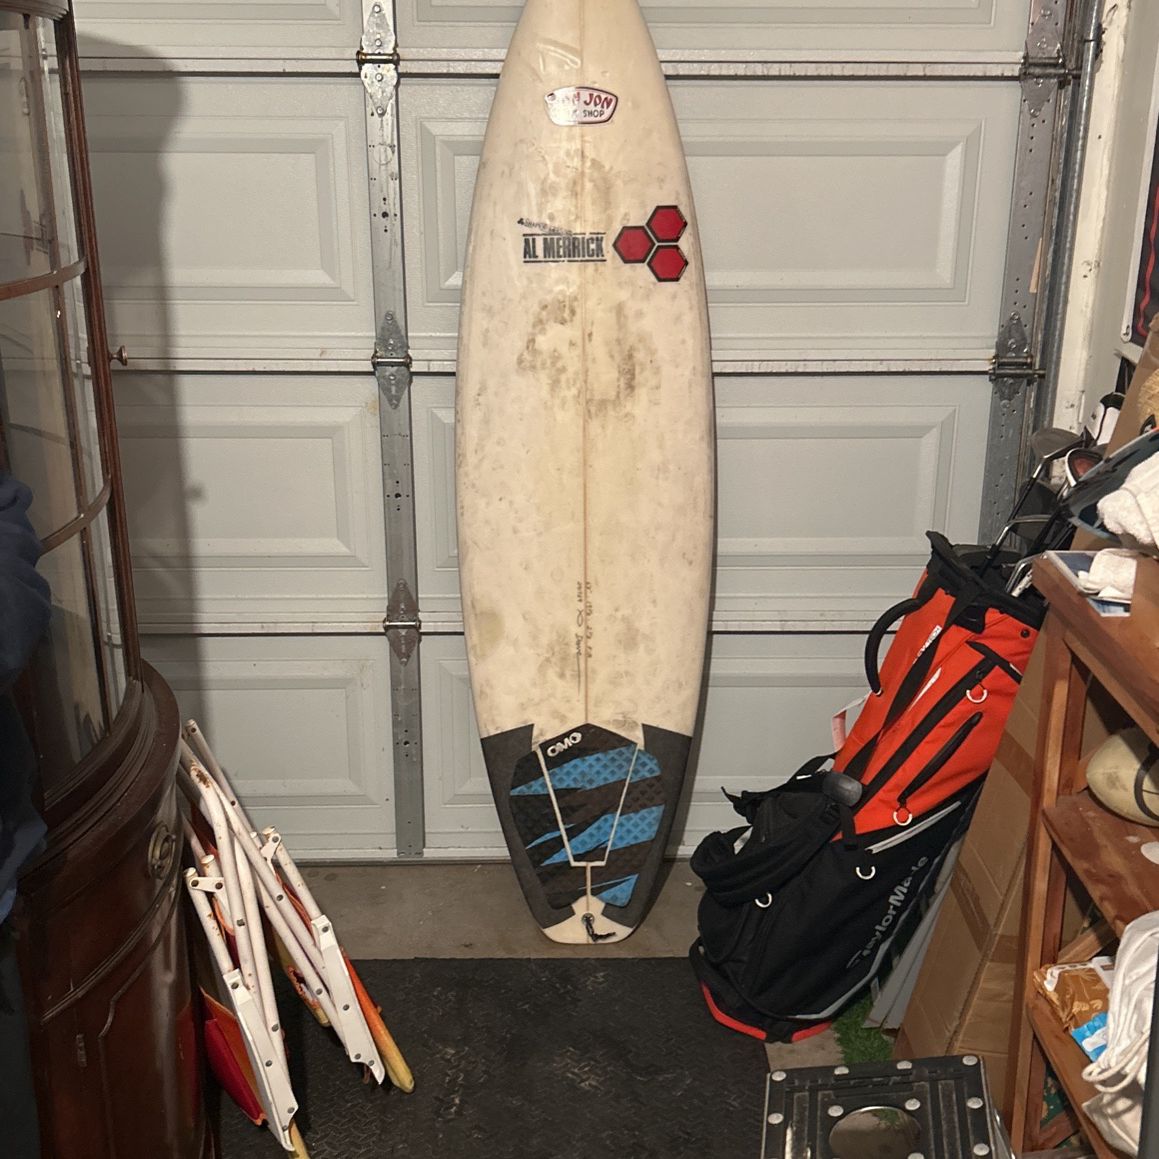 Surfboard: Al Merrick 6’3, 19.5 Liters. 2 Inches Thick